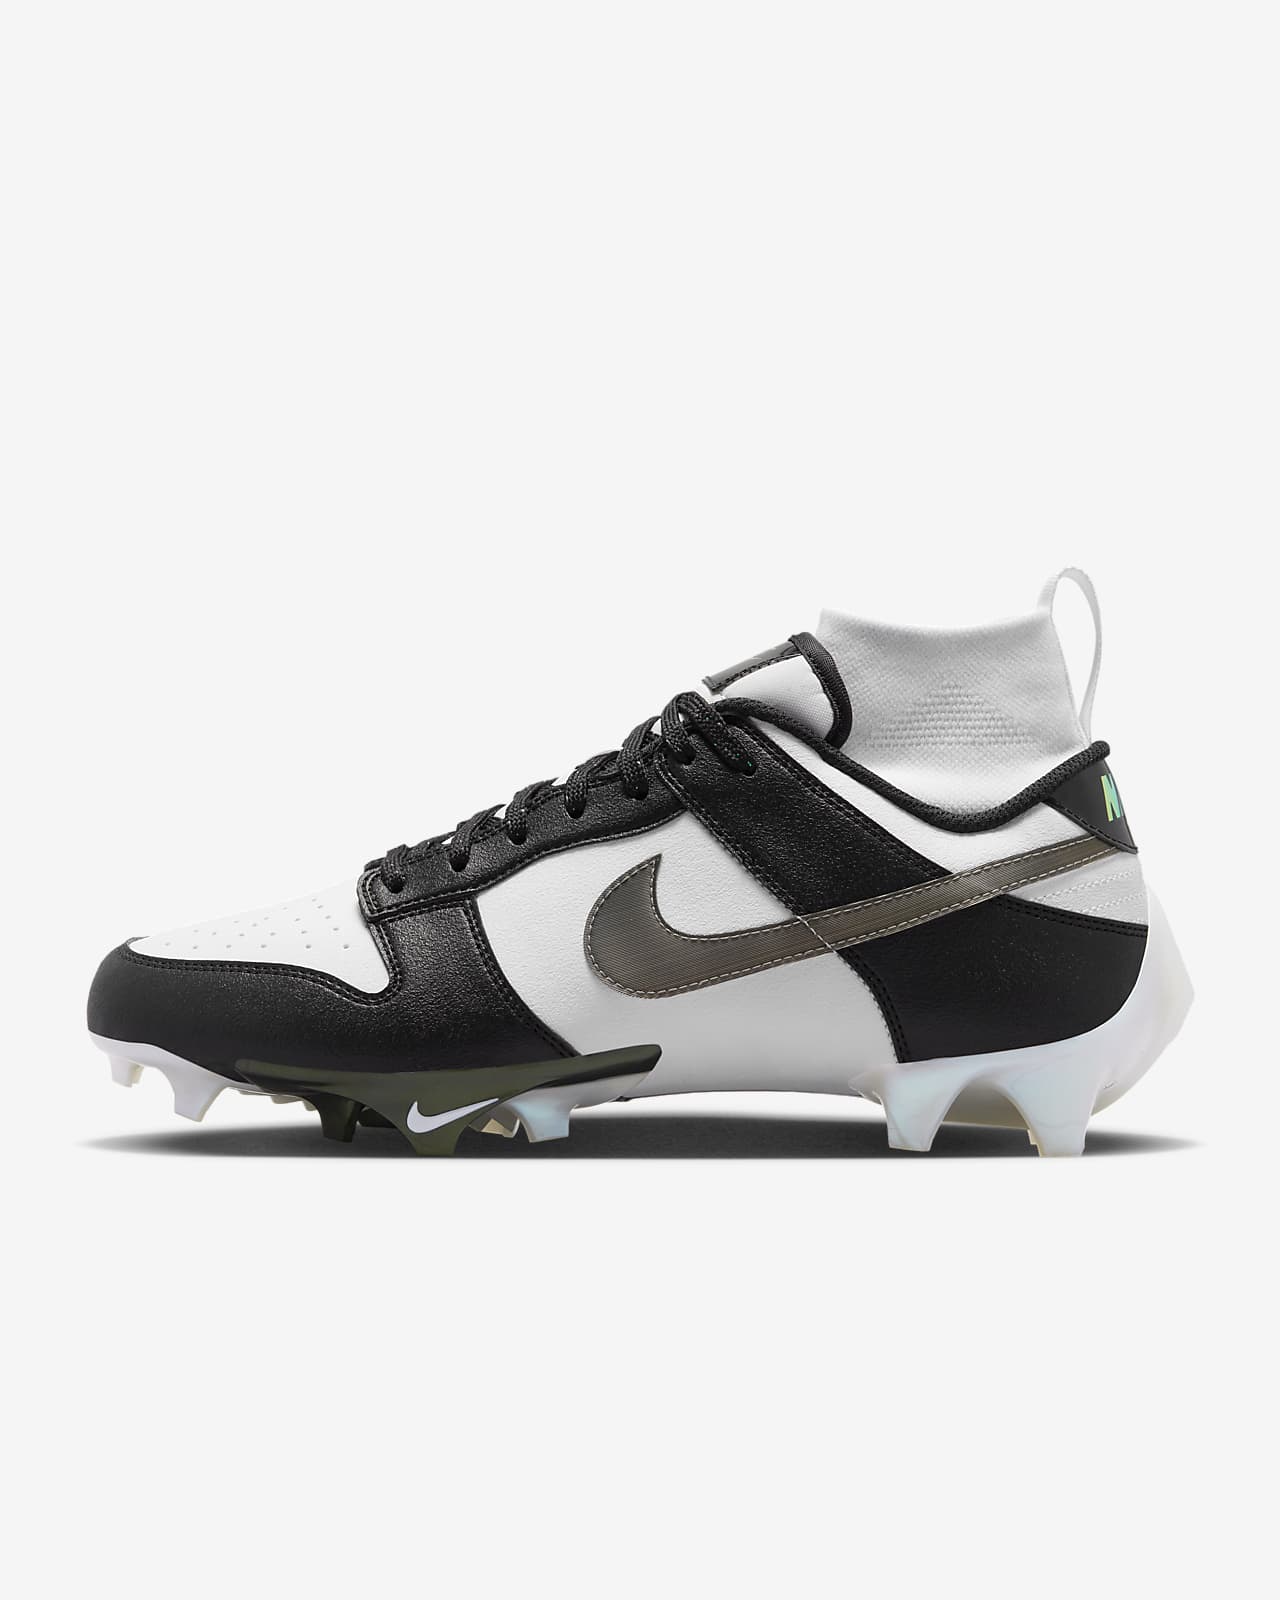 Archeology Courageous more and more Nike Vapor Edge Dunk Men's Football Cleats. Nike.com